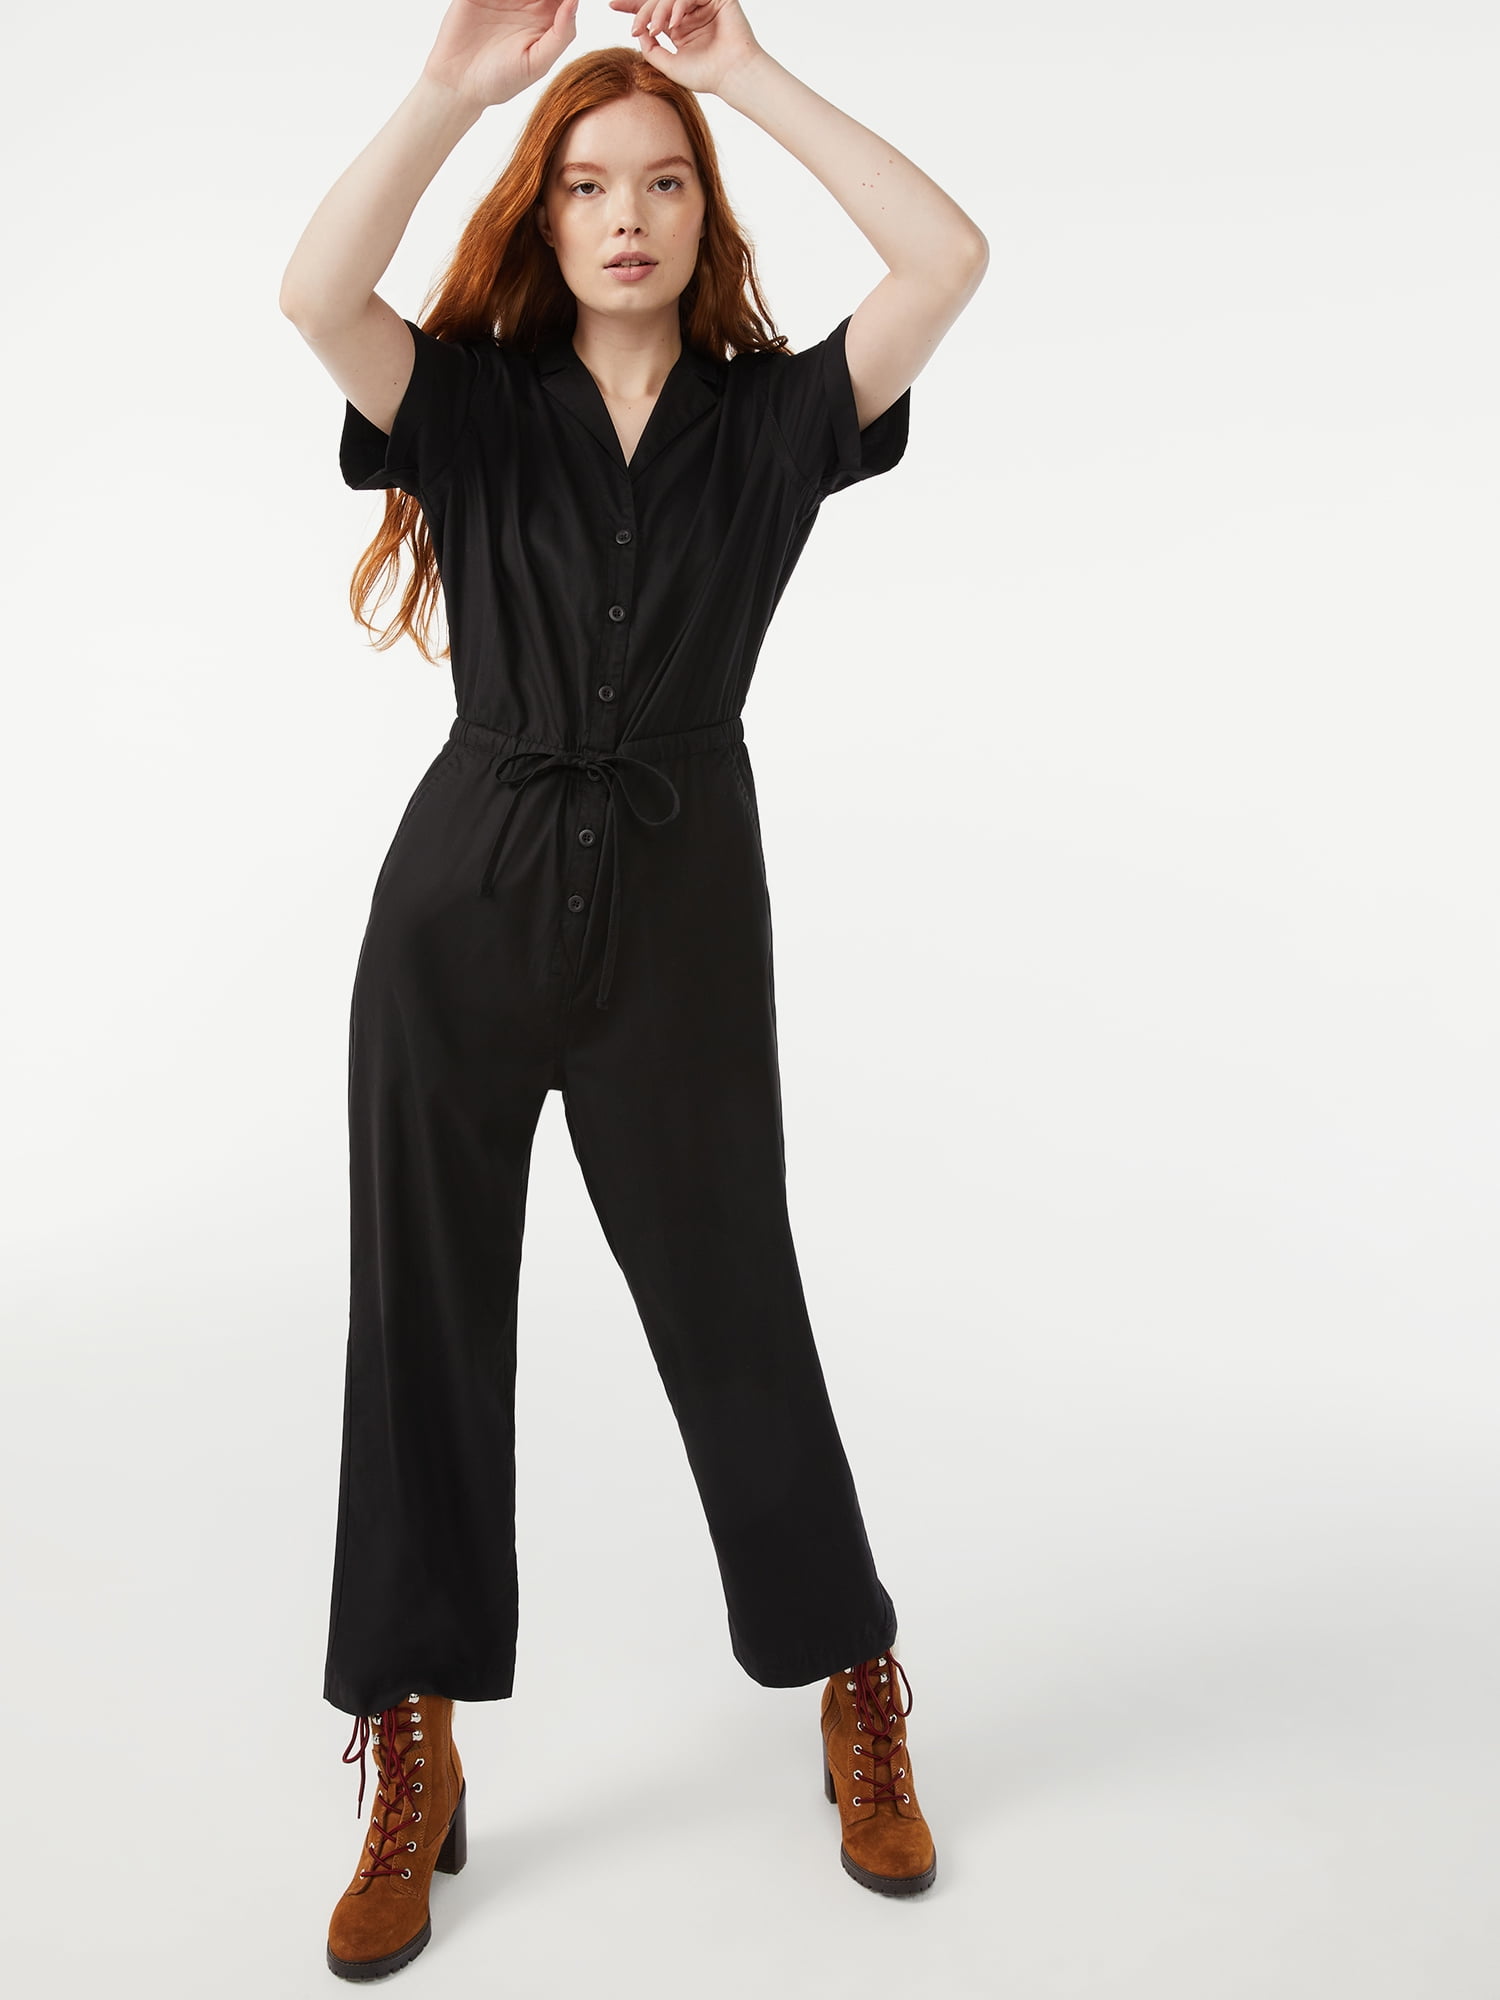 Free Assembly Women's Short Sleeve Romper with Elastic Waist